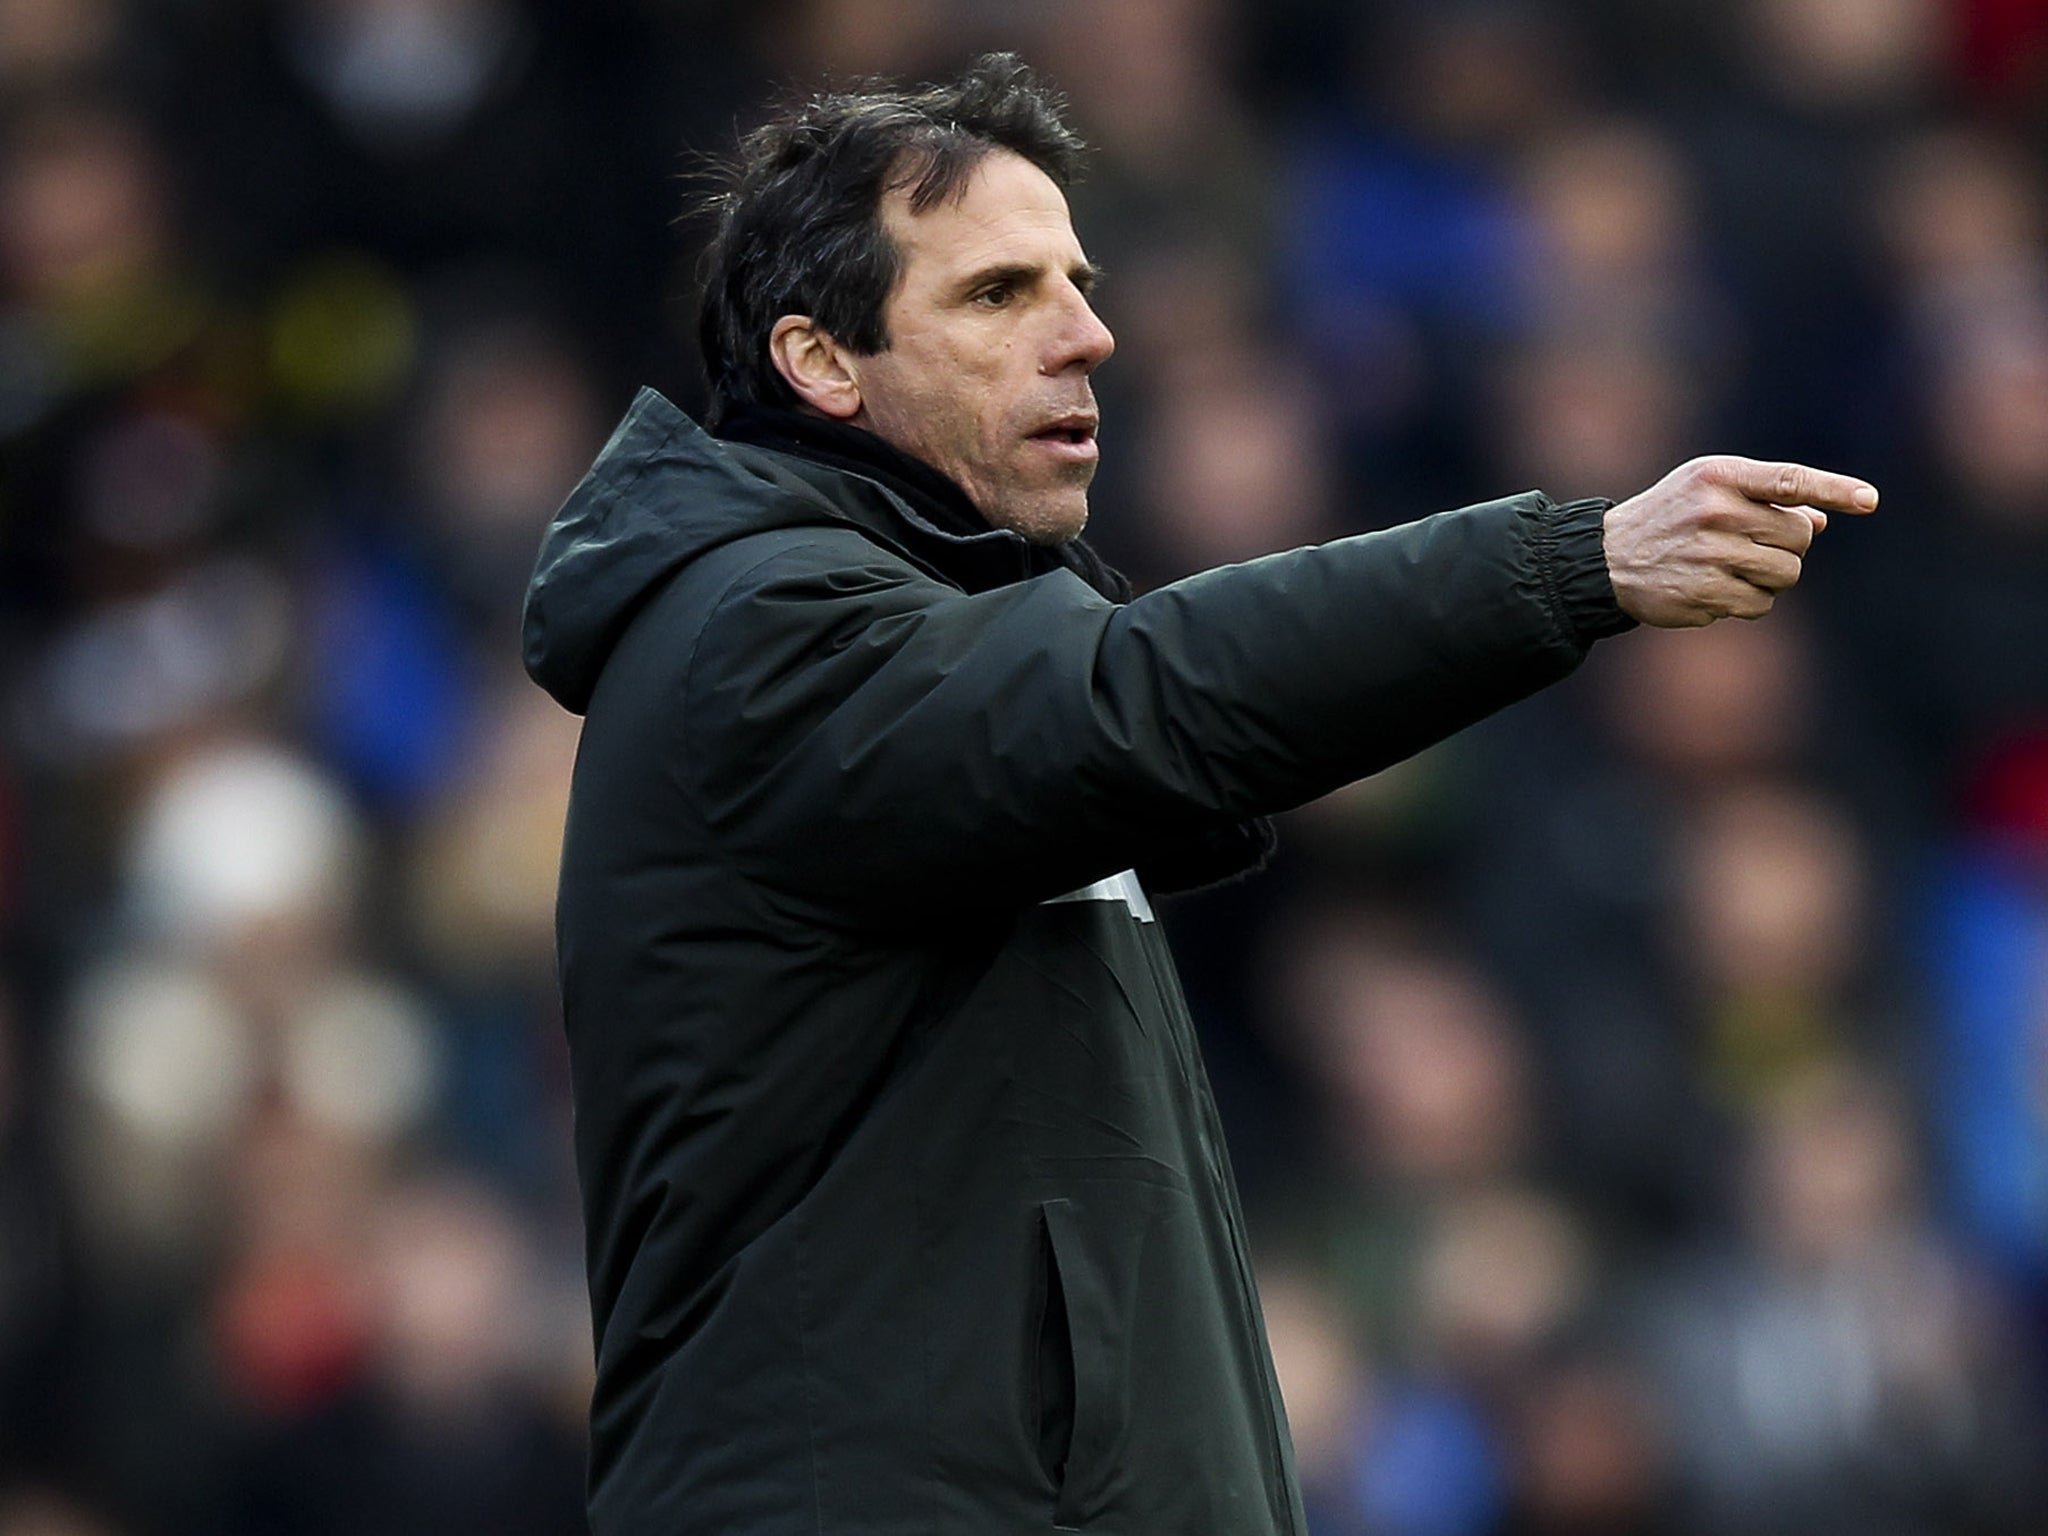 ‘I didn’t see it coming,’ admitted Gianfranco Zola of the equaliser